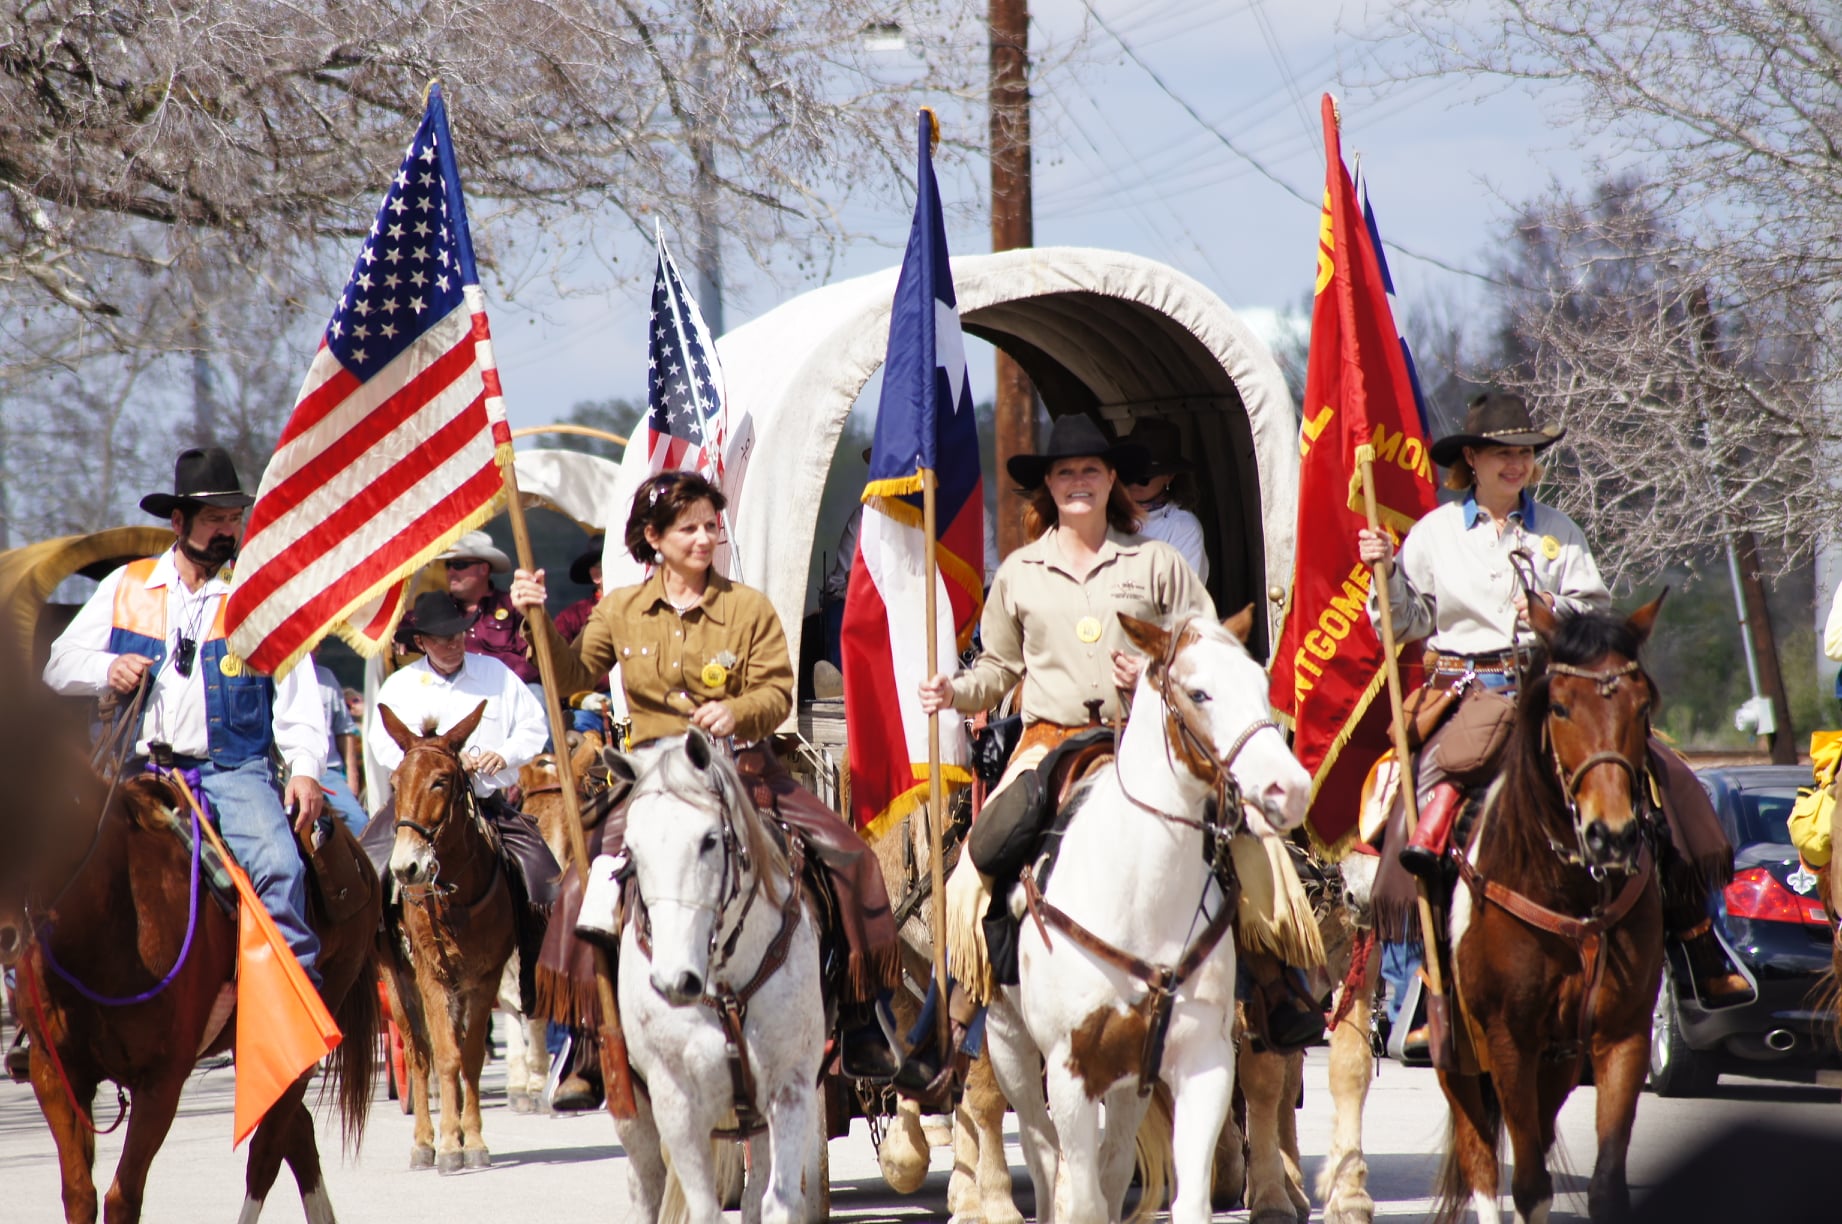 68th Annual Sam Houston Trail Ride Coming to Tomball February 21